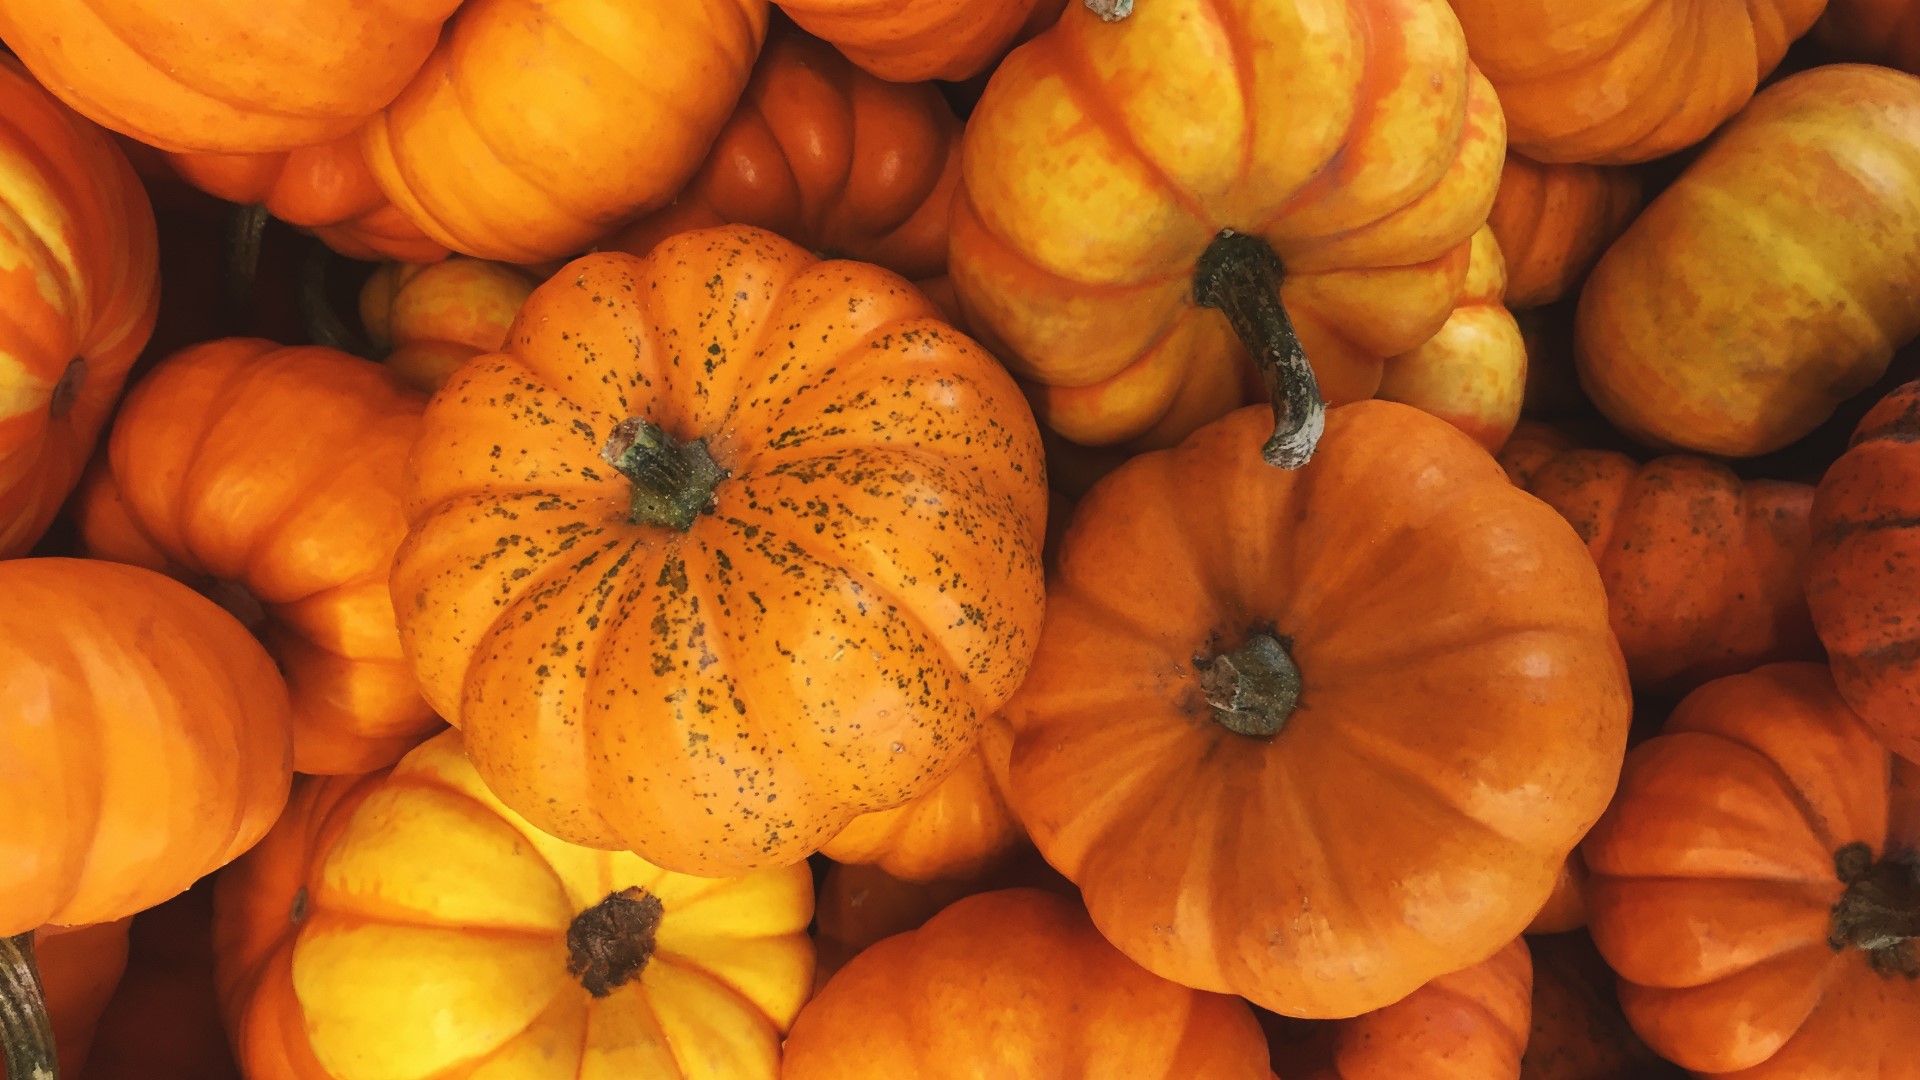 Roasted mini sweet pumpkins are tasty and easy to make. 9NEWS Nutritionist Malena Perdomo shows us how.